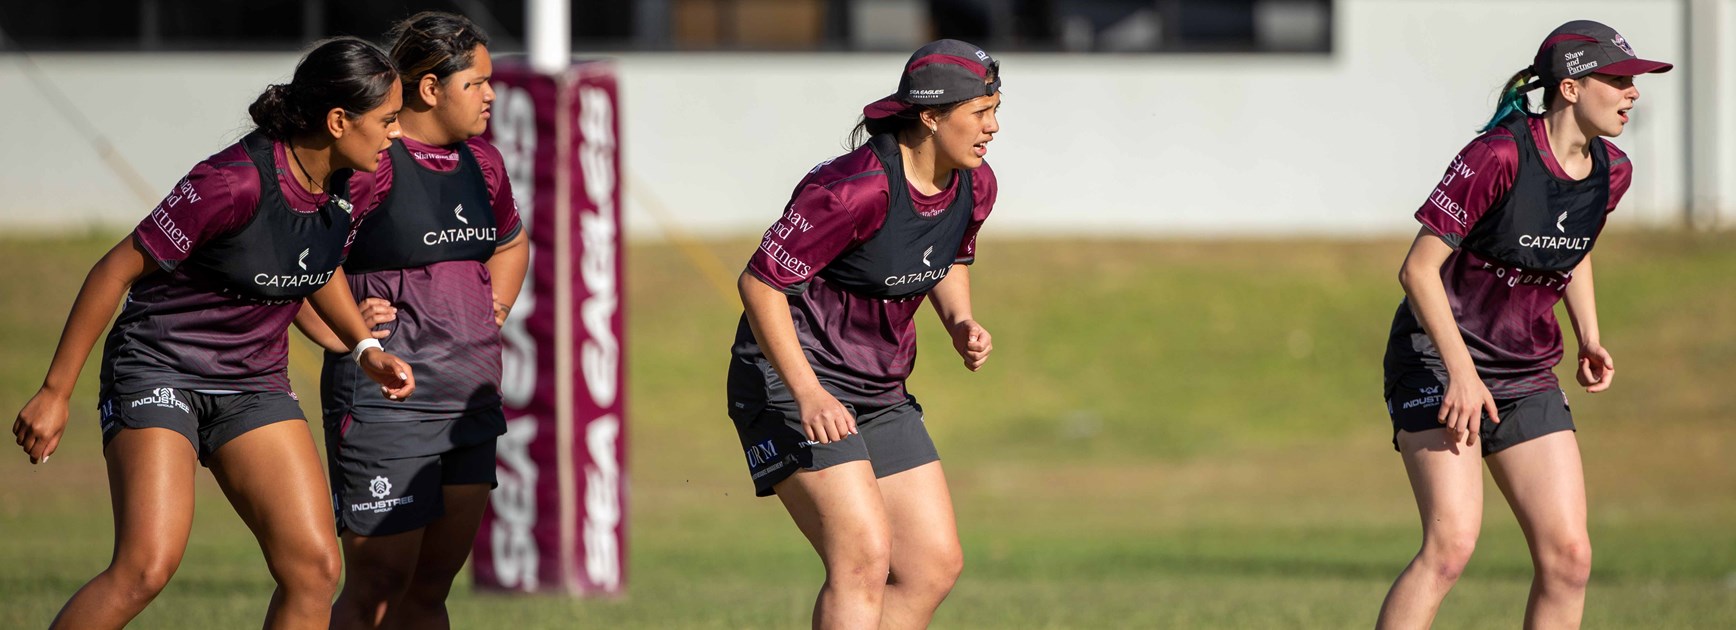 Sea Eagles to hold Come and Try Rugby League Day for girls